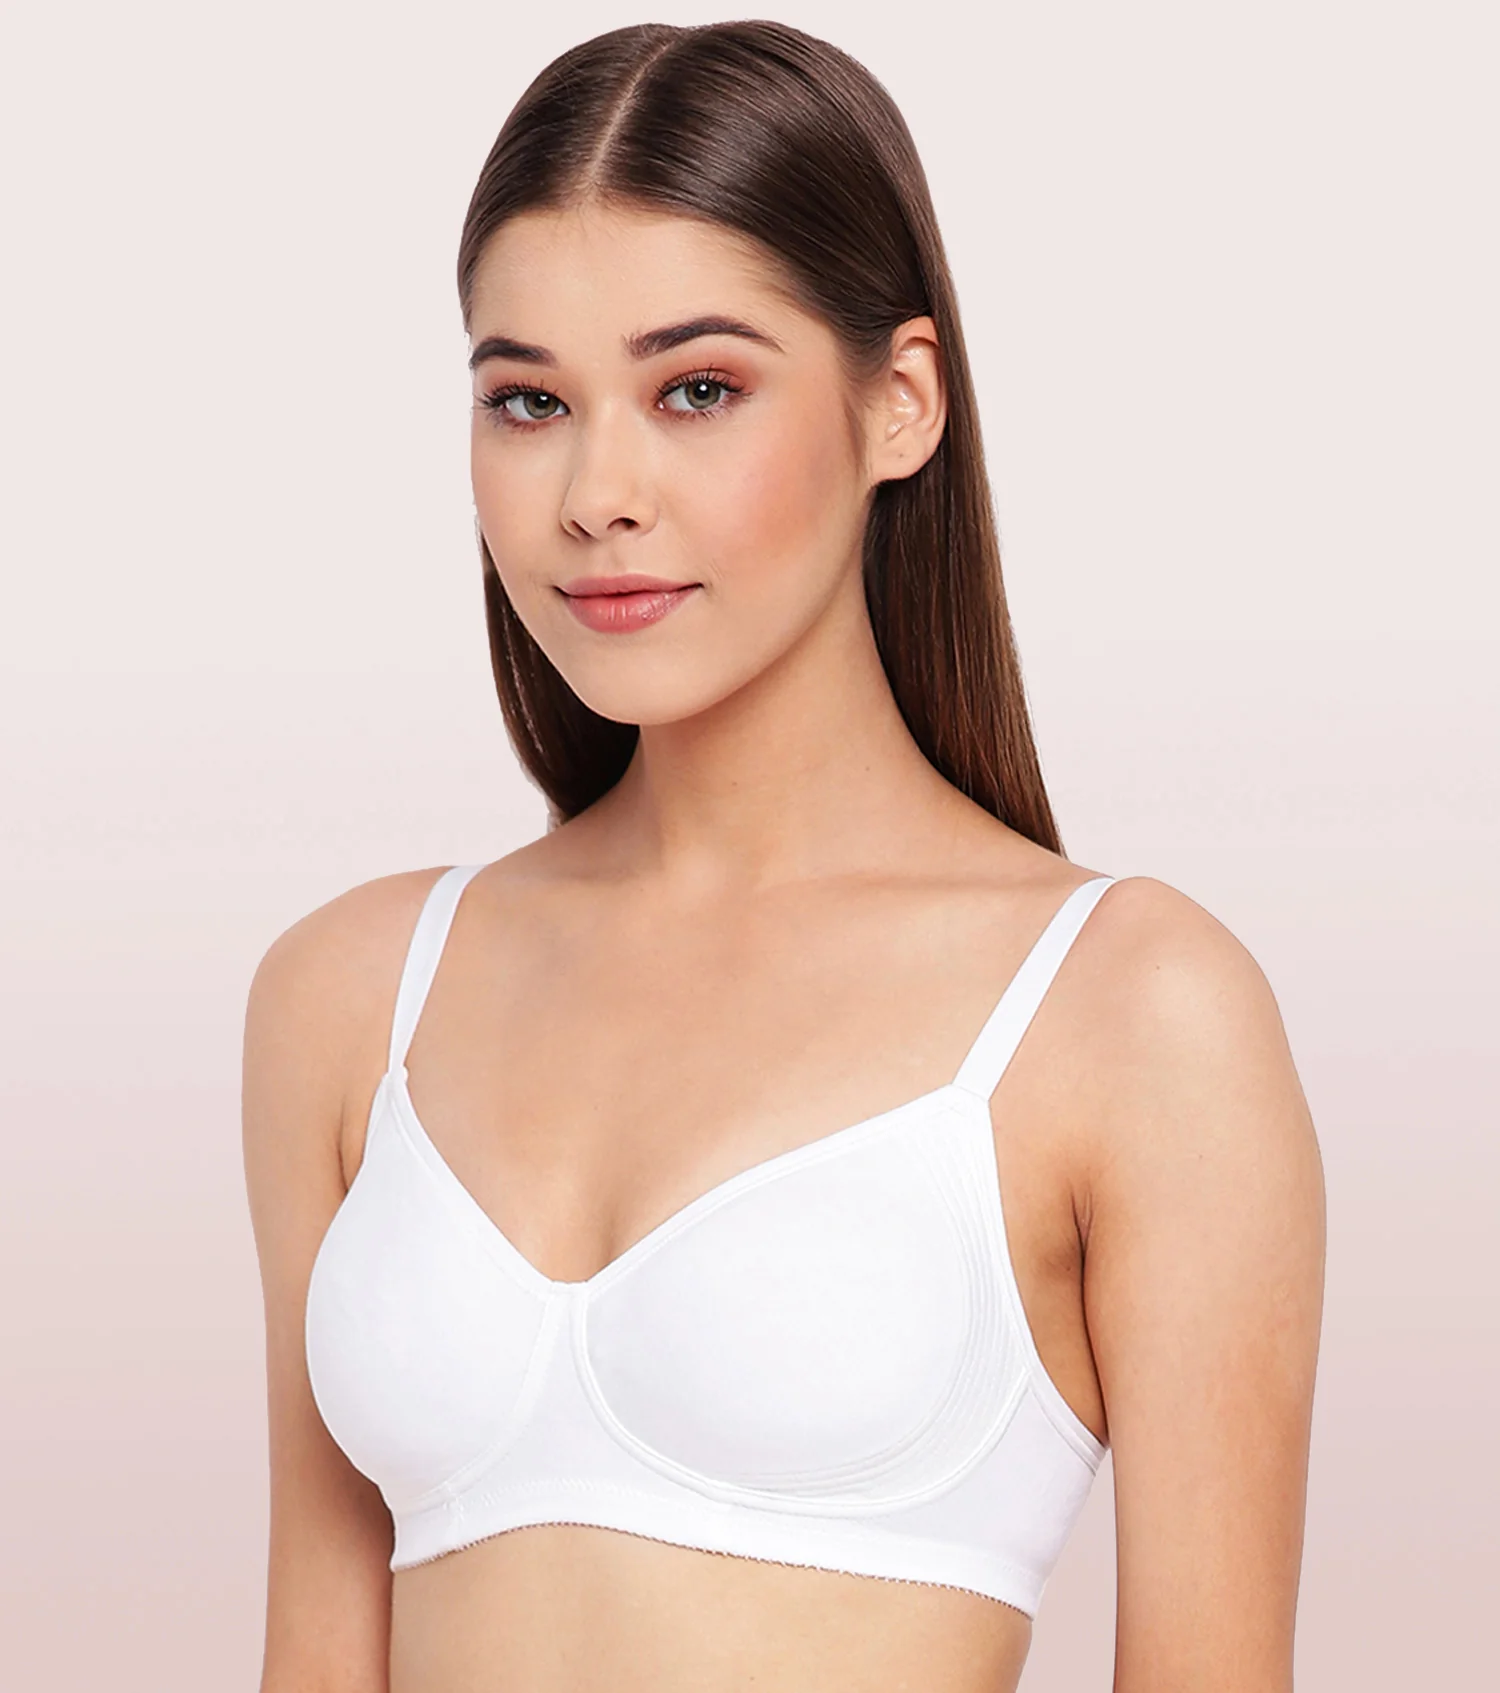 Enamor Womens Side Support Shaper Cotton Everyday Bra A042 White